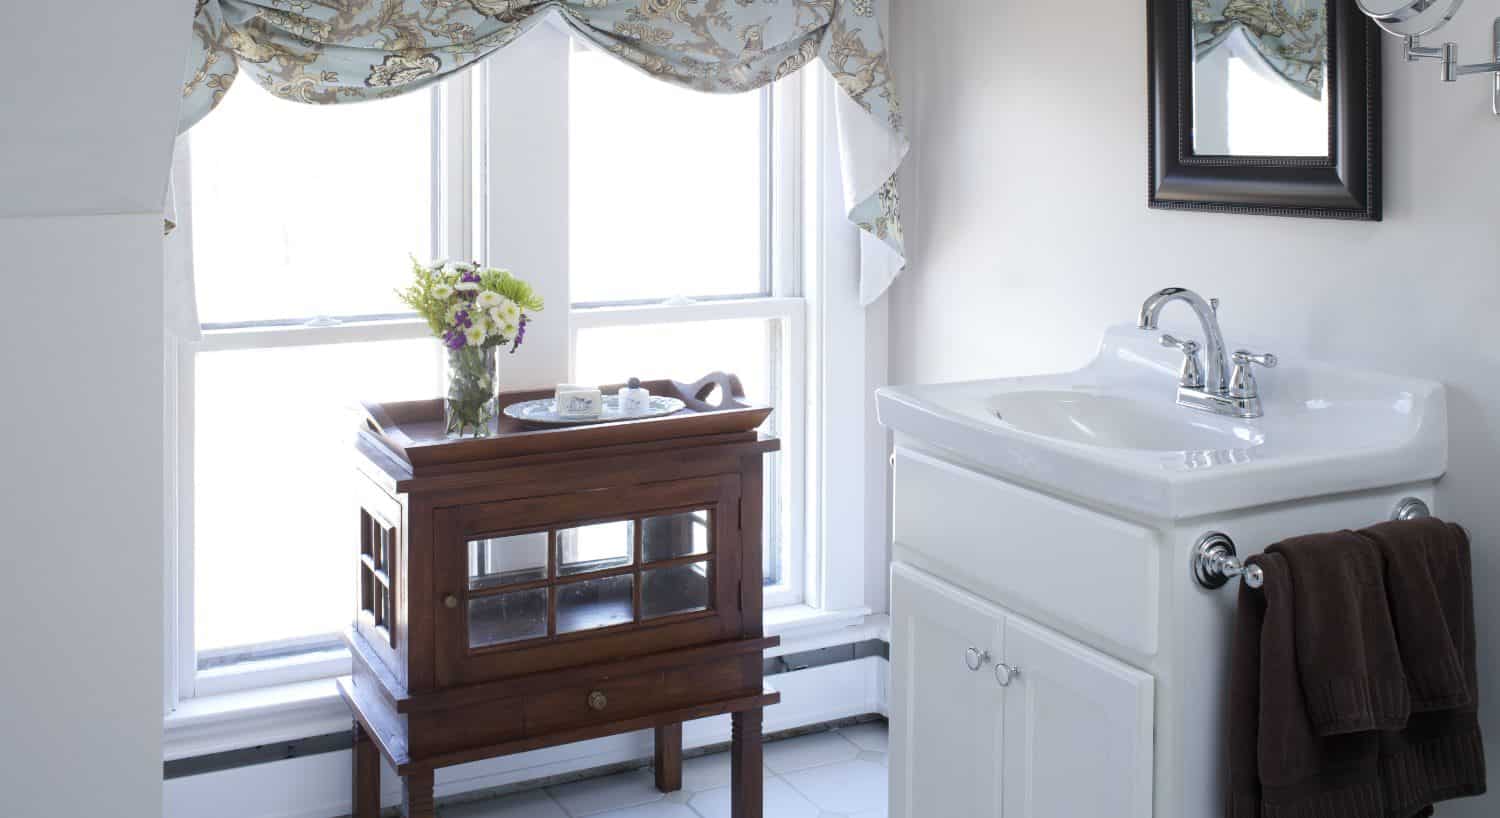 Bathroom with light colored walls, white trim, dark wooden table, white sink, and white vanity